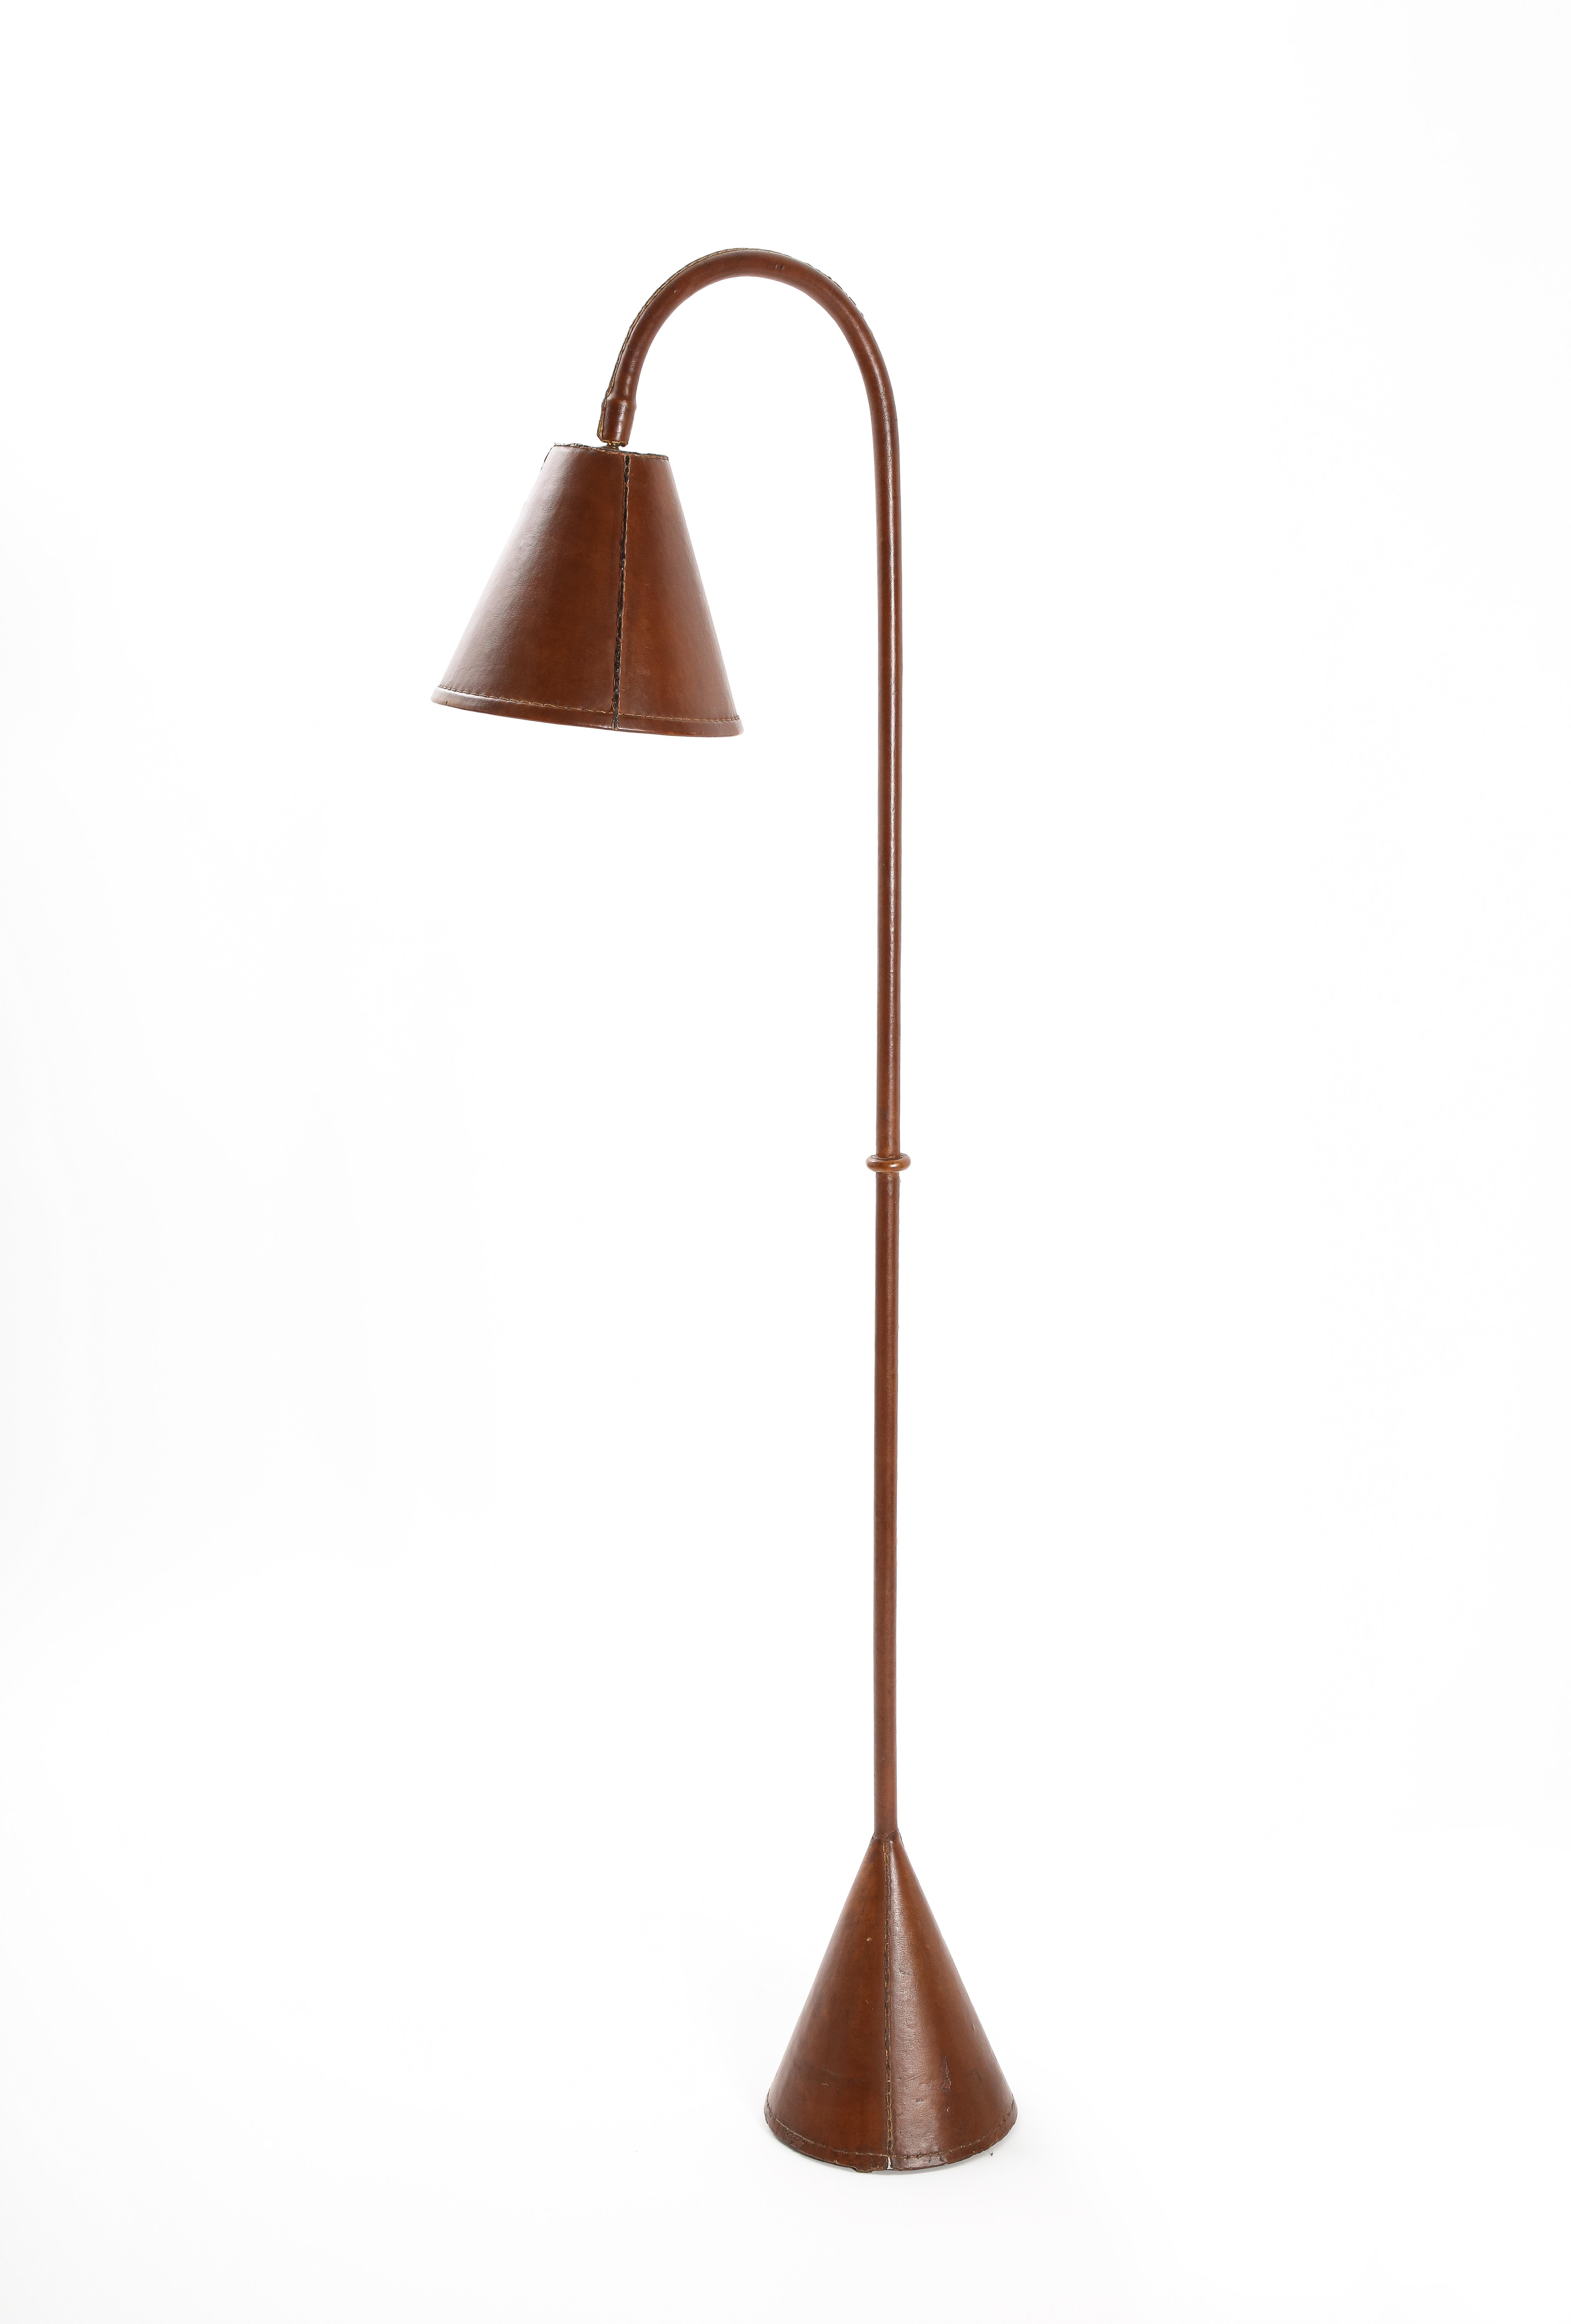 Jacques Adnet Dual Cone Floor Lamp, France, 1950's 2